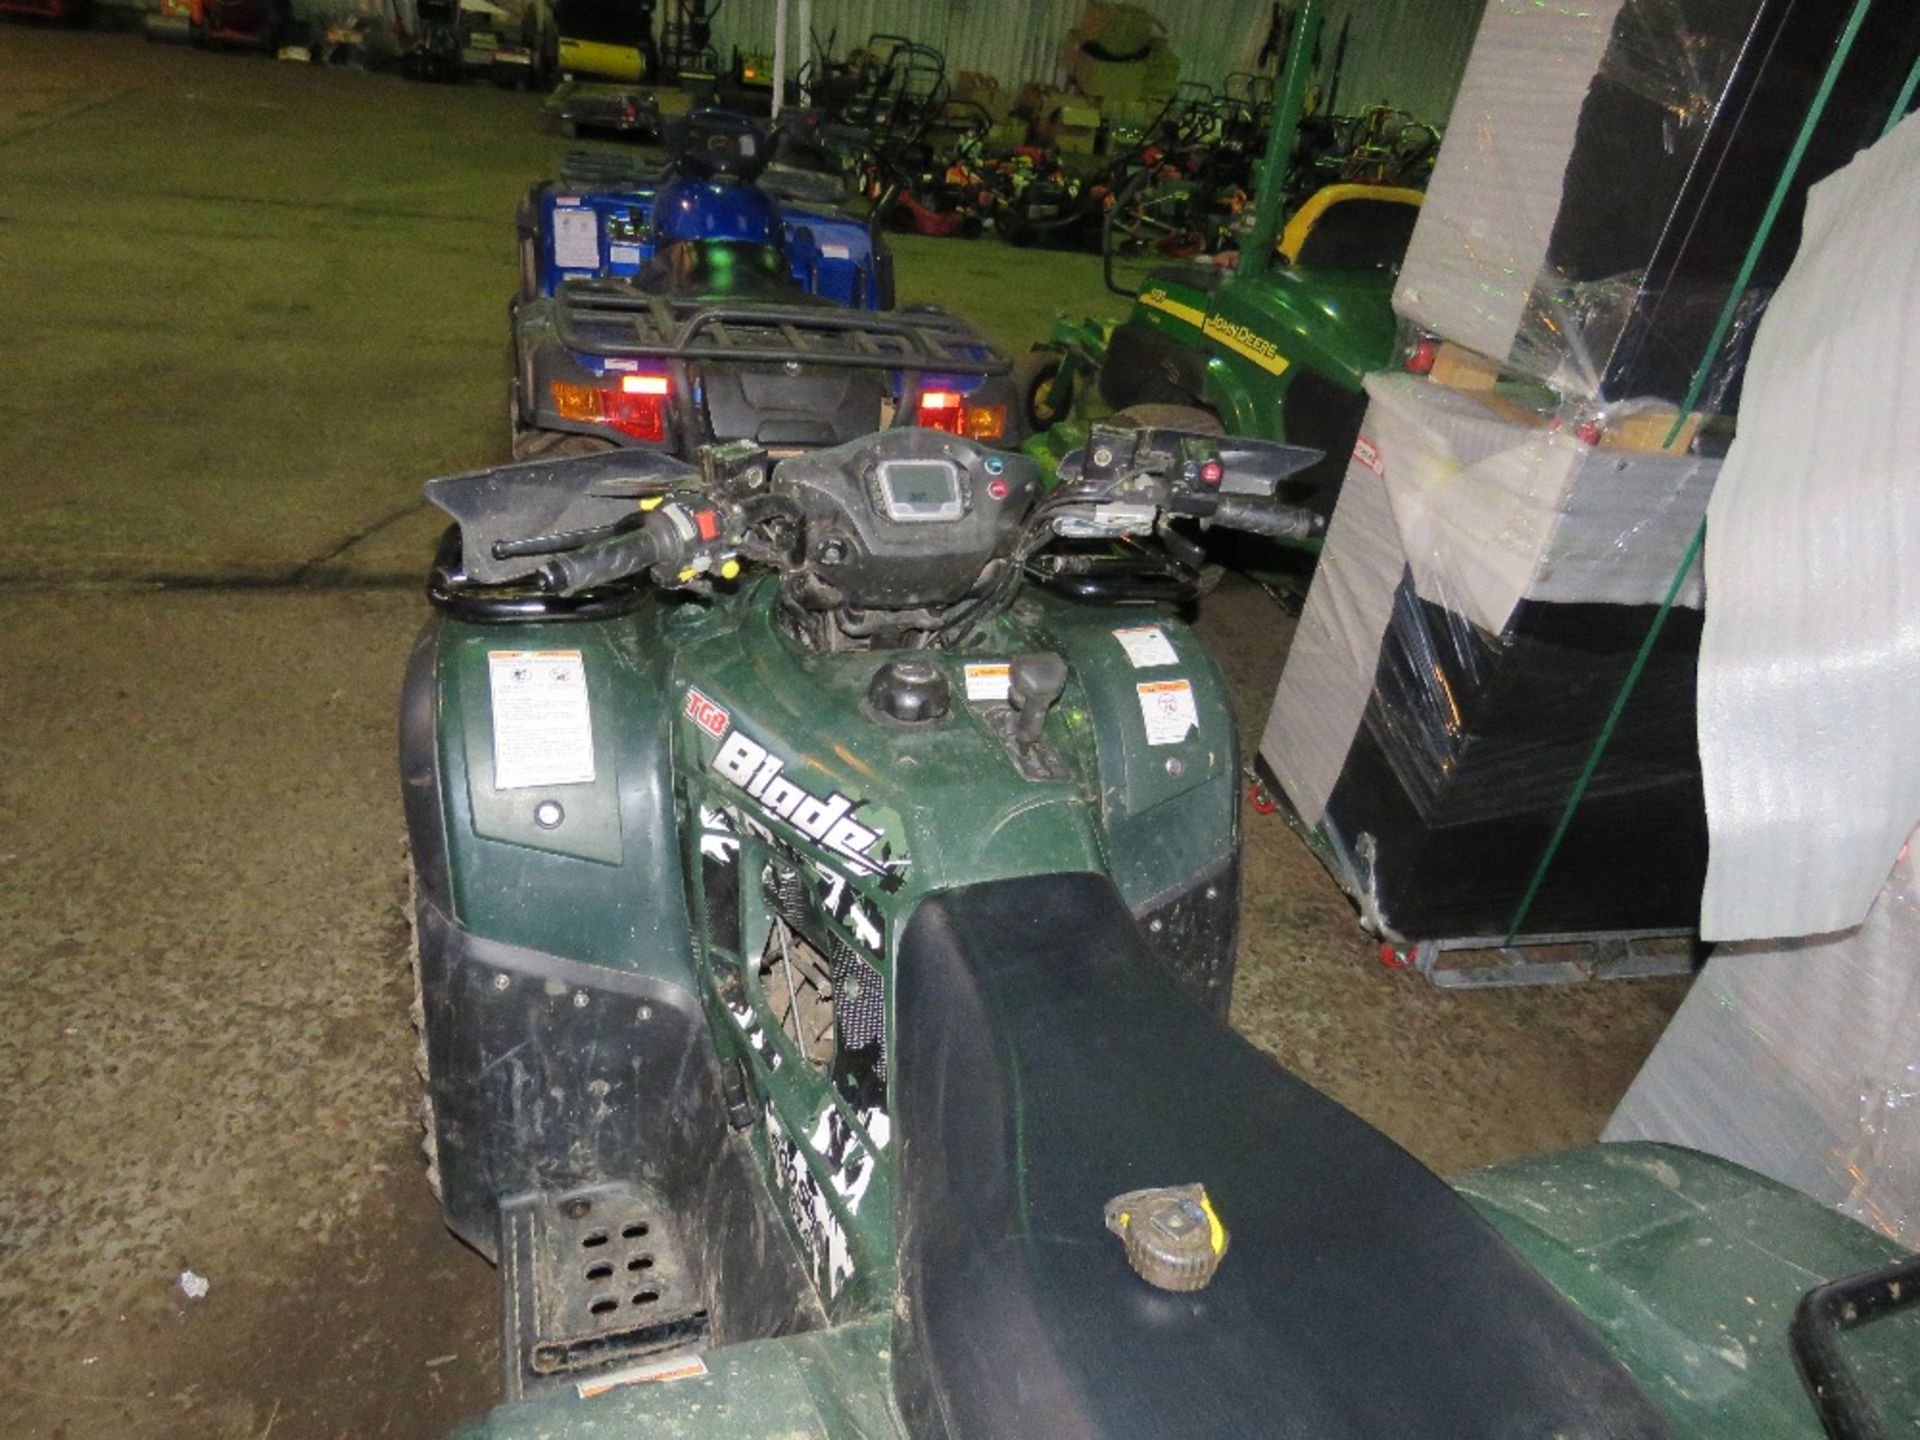 TGB/QUADZILLA BLADE 500SL SELECTABLE 4WD QUAD BIKE, YEAR 2015 APPROX, 970 REC MILES APPROX. WHEN TES - Image 5 of 7